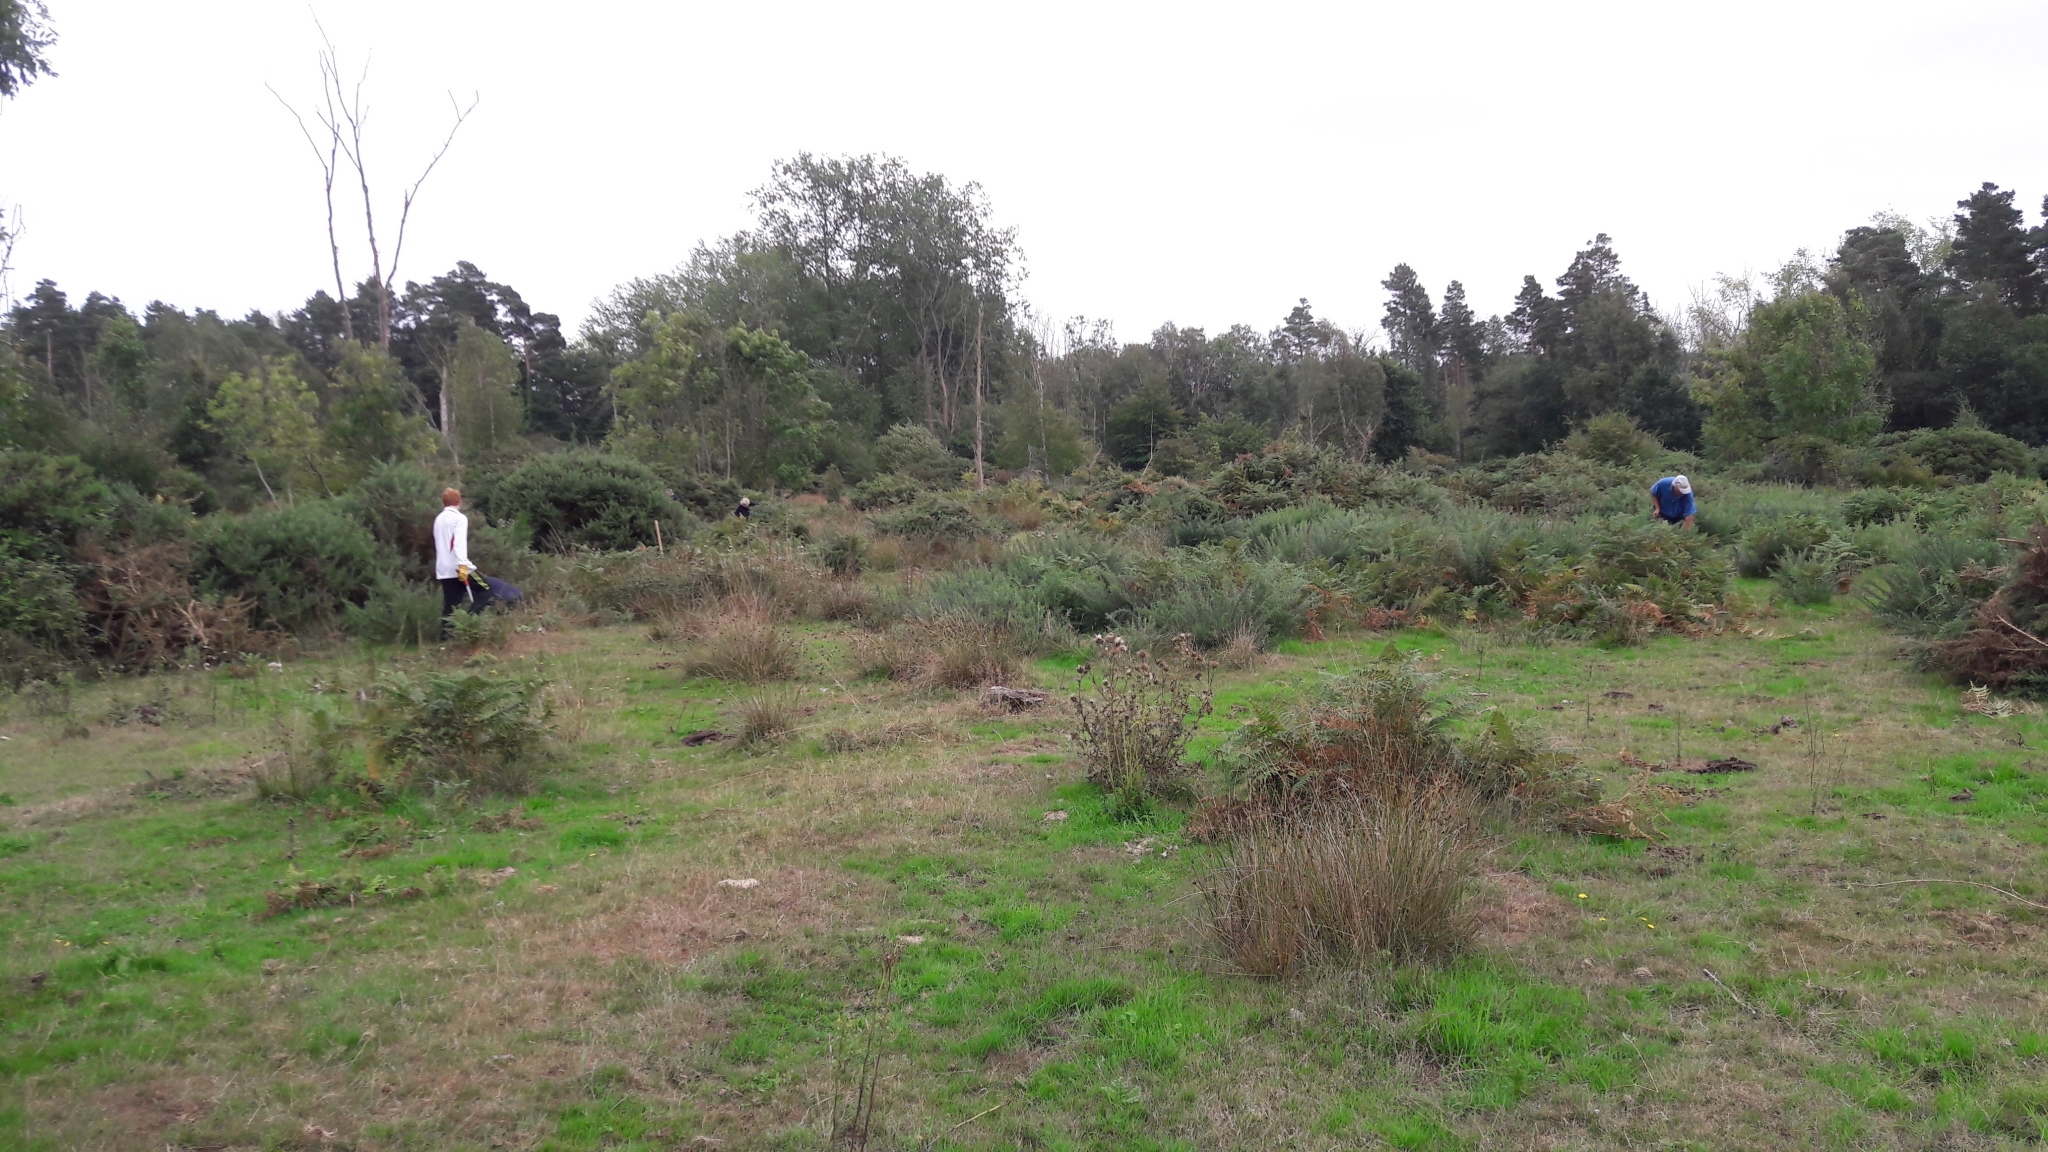 A photo from the FoTF Conservation Event - August 2018 - Gorse Removal at Hockham Hills & Holes : Volunteers at work across the work site